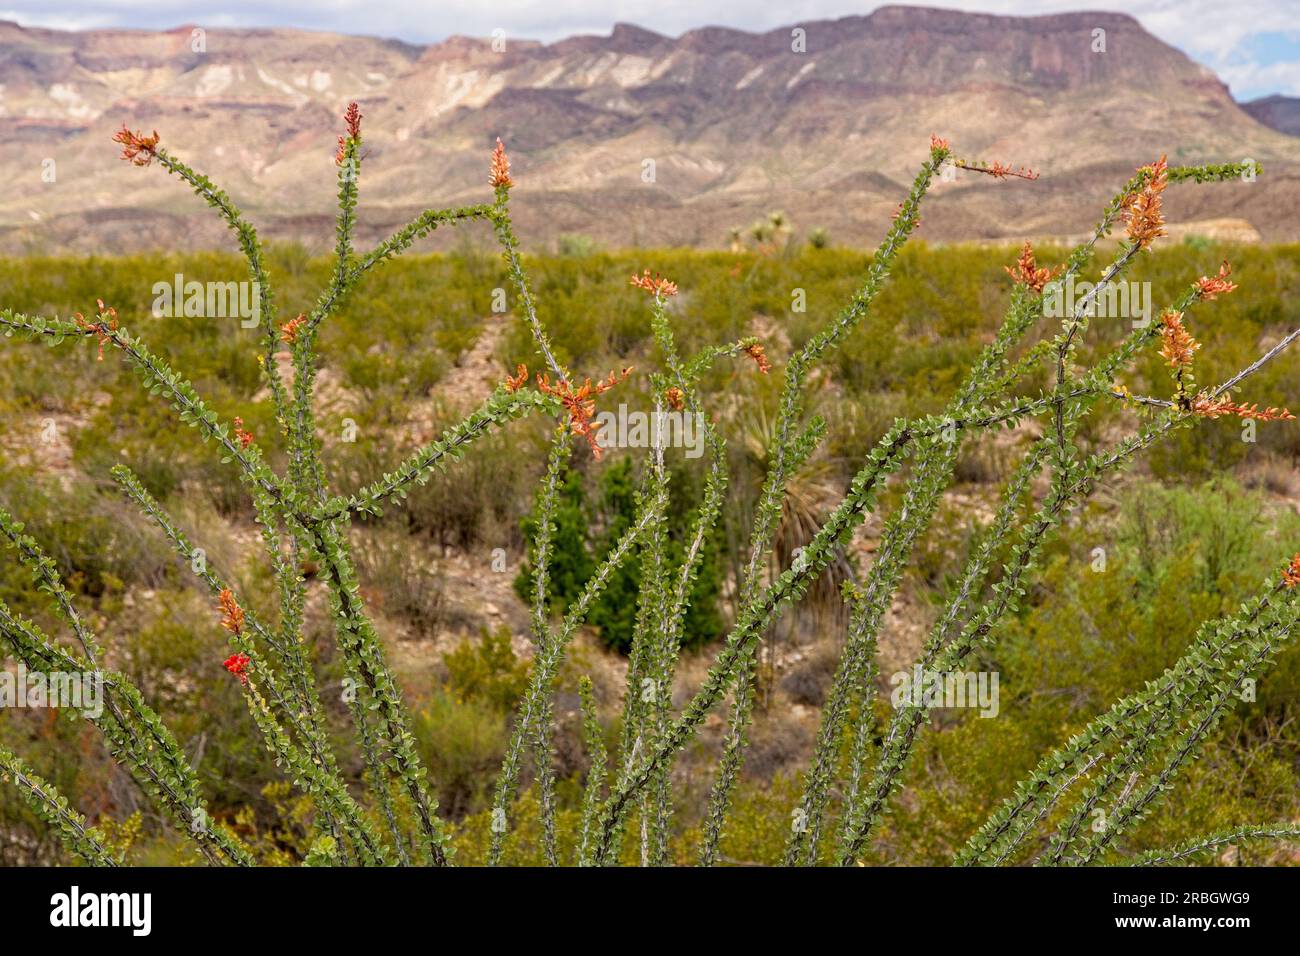 Ocotillo cactus stand before distant mountains in Chihuahuan desert of Big Bend Ranch State Park Stock Photo